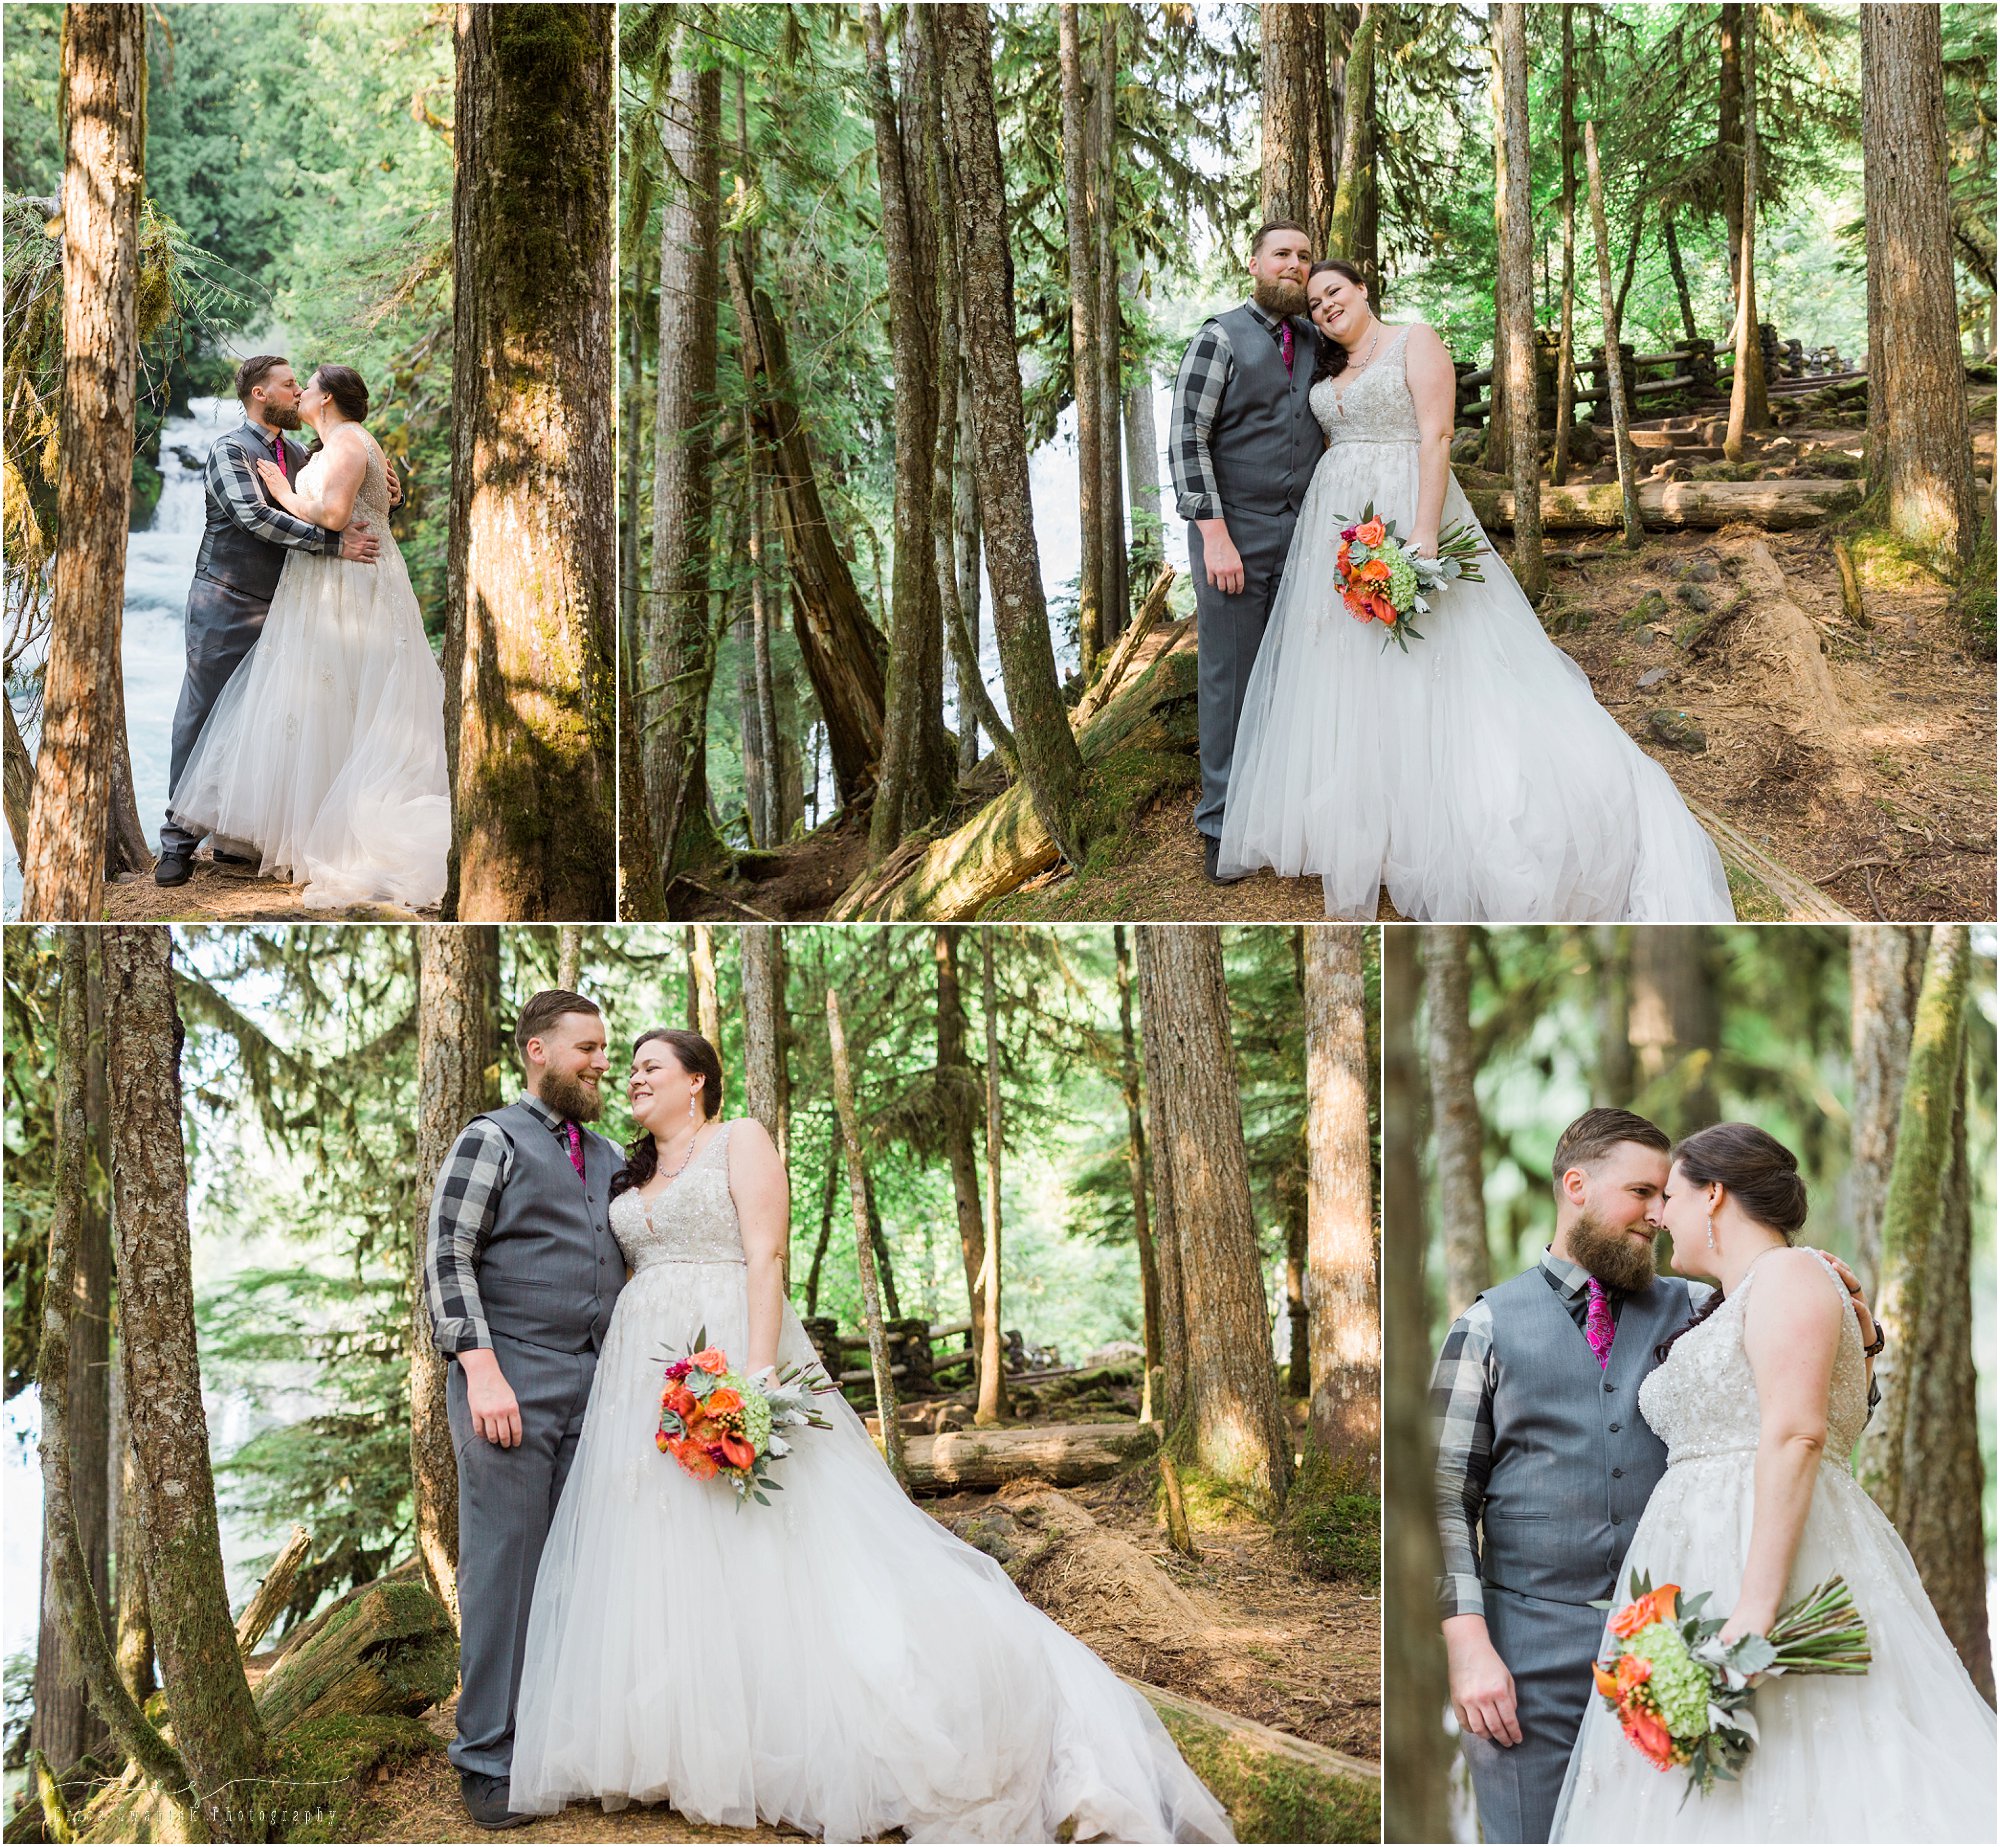 A bearded groom wearing a grey vest and checkered shirt with his bride wearing a beautiful Stella York gown at their intimate wedding at Sahalie Falls in Oregon. | Erica Swantek Photography